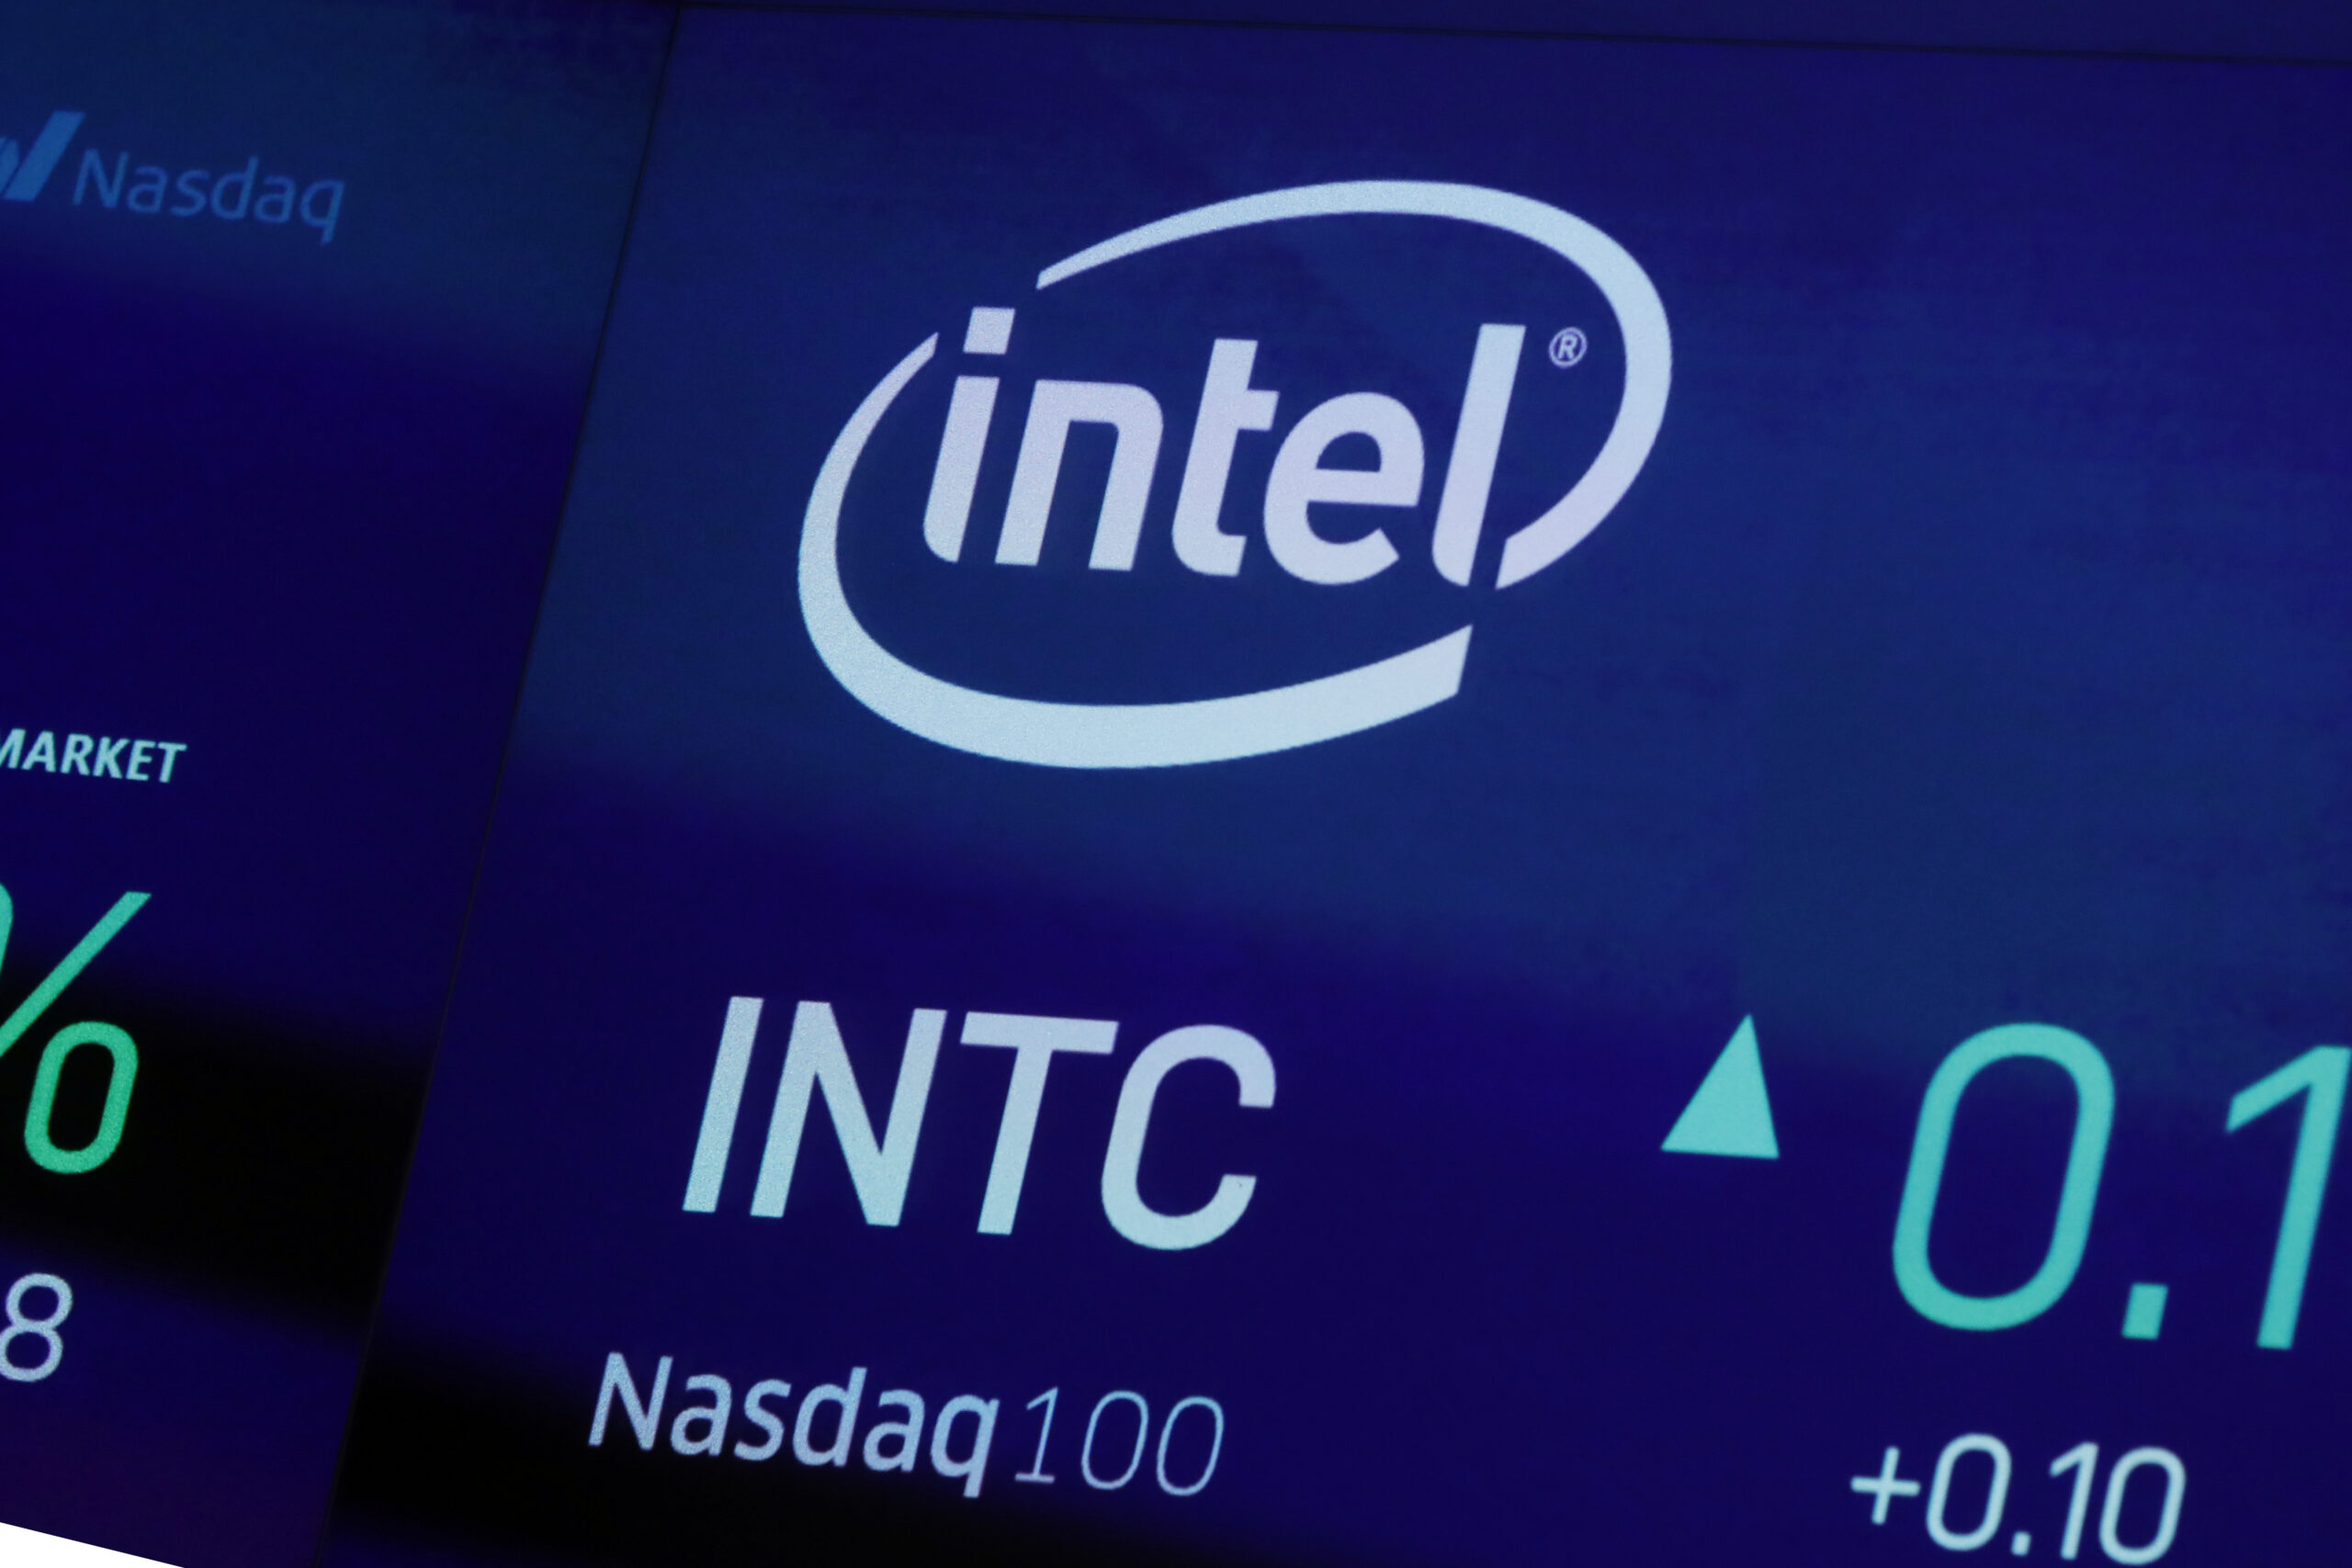 FILE - In this Oct. 1, 2019, file photo the symbol for Intel appears on a screen at the Nasdaq MarketSite, in New York. Intel Corp. is planning an initial investment of more than $20 billion for two semiconductor chip plants in central Ohio to help address a global shortage of semiconductor chips. The plants are expected to create 3,000 Intel jobs and 7,000 construction jobs over the course of the build, and to support tens of thousands of additional local long-term jobs across a broad ecosystem of suppliers and partners. (AP Photo/Richard Drew, File)